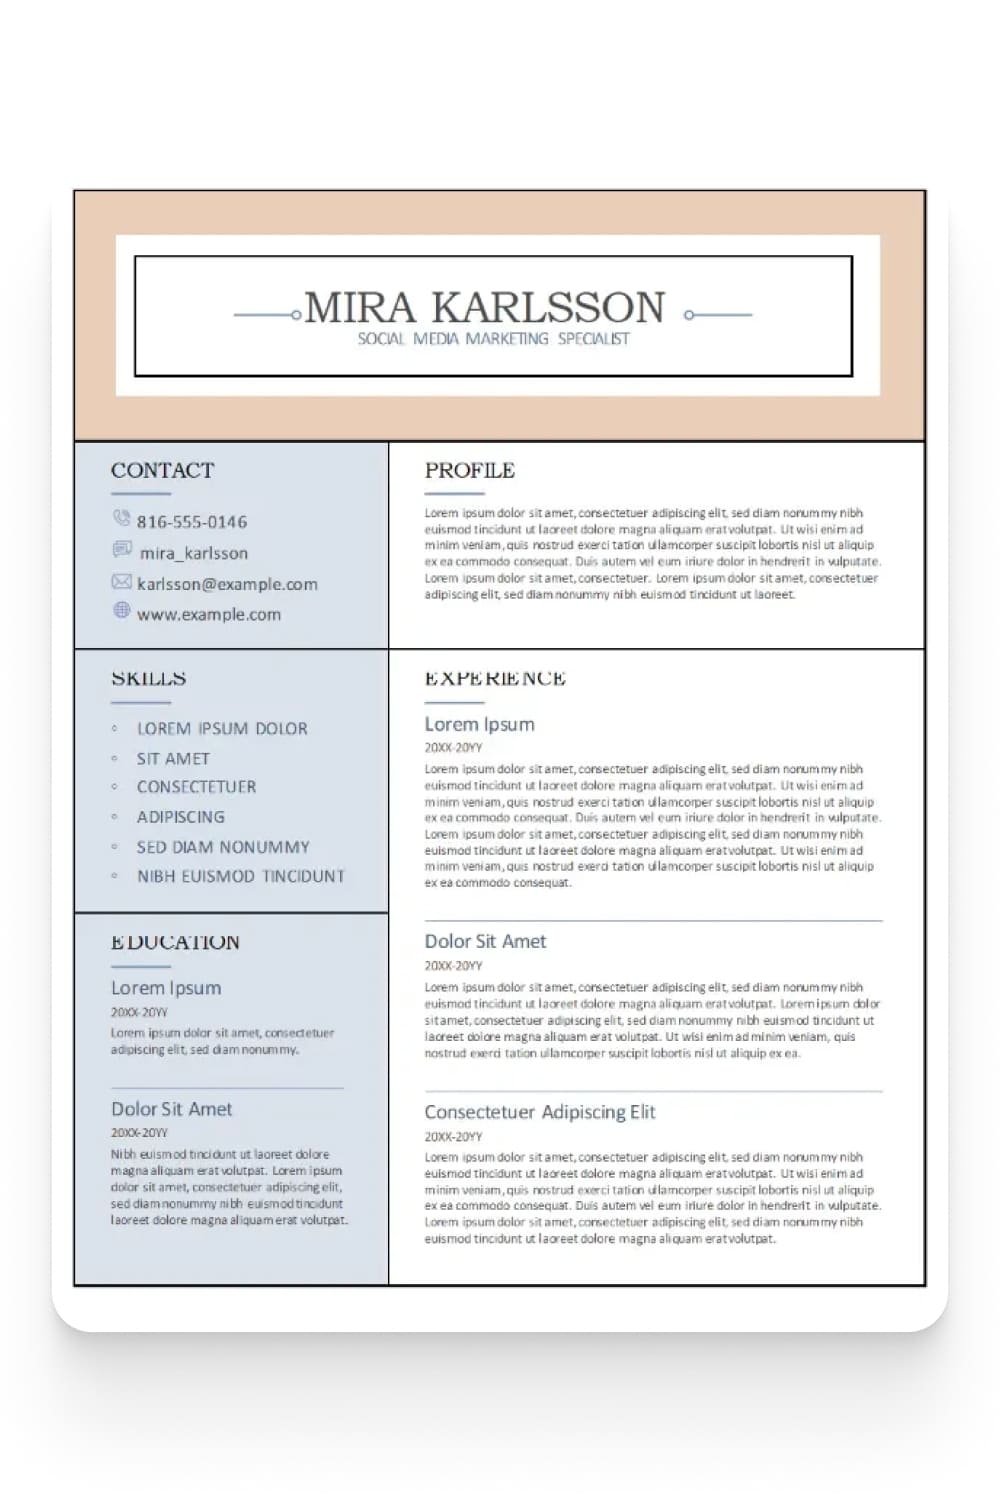 Resume in the form of a table with a white, gray and orange background.